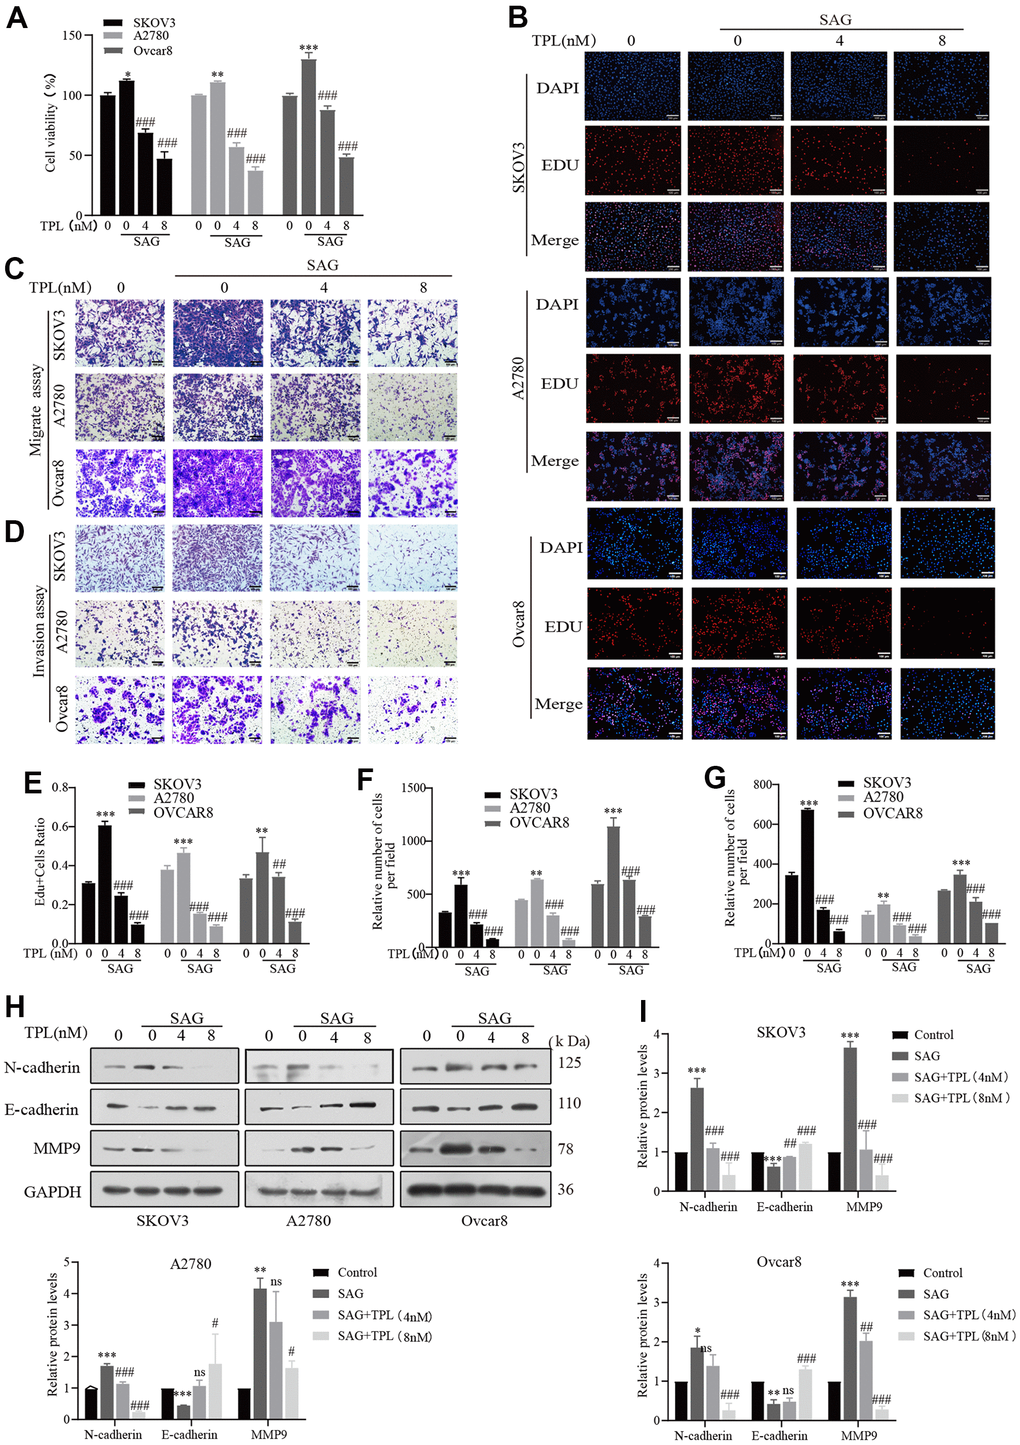 Triptolide inhibits SAG-induced EOC cells proliferation, migration, and invasion. (A, B) TPL inhibited the cell proliferation provoked by SAG (1 μM). (C) Migration assay showed that TPL restrains the SAG-induced migration ability of SKOV3, A2780, and Ovcar8 cells. (D) Invasion assay showed that TPL inhibits SAG-induced invasion ability. (E) The quantification of EdU-positive cells was analyzed. Graph (F) represents the positive cell's number of migrations. Graphs (G) represent the positive cell's number of invasions. (H, I) The effects of SAG on the protein levels of MMP9, E-cadherin, and N-cadherin protein, and TPL could reverse the results produced by SAG, and GAPDH was used for normalization. Scale bar: 100 μm. All results were derived from three independent repeated experiments and represented by mean ± SD, * p p p p p p 